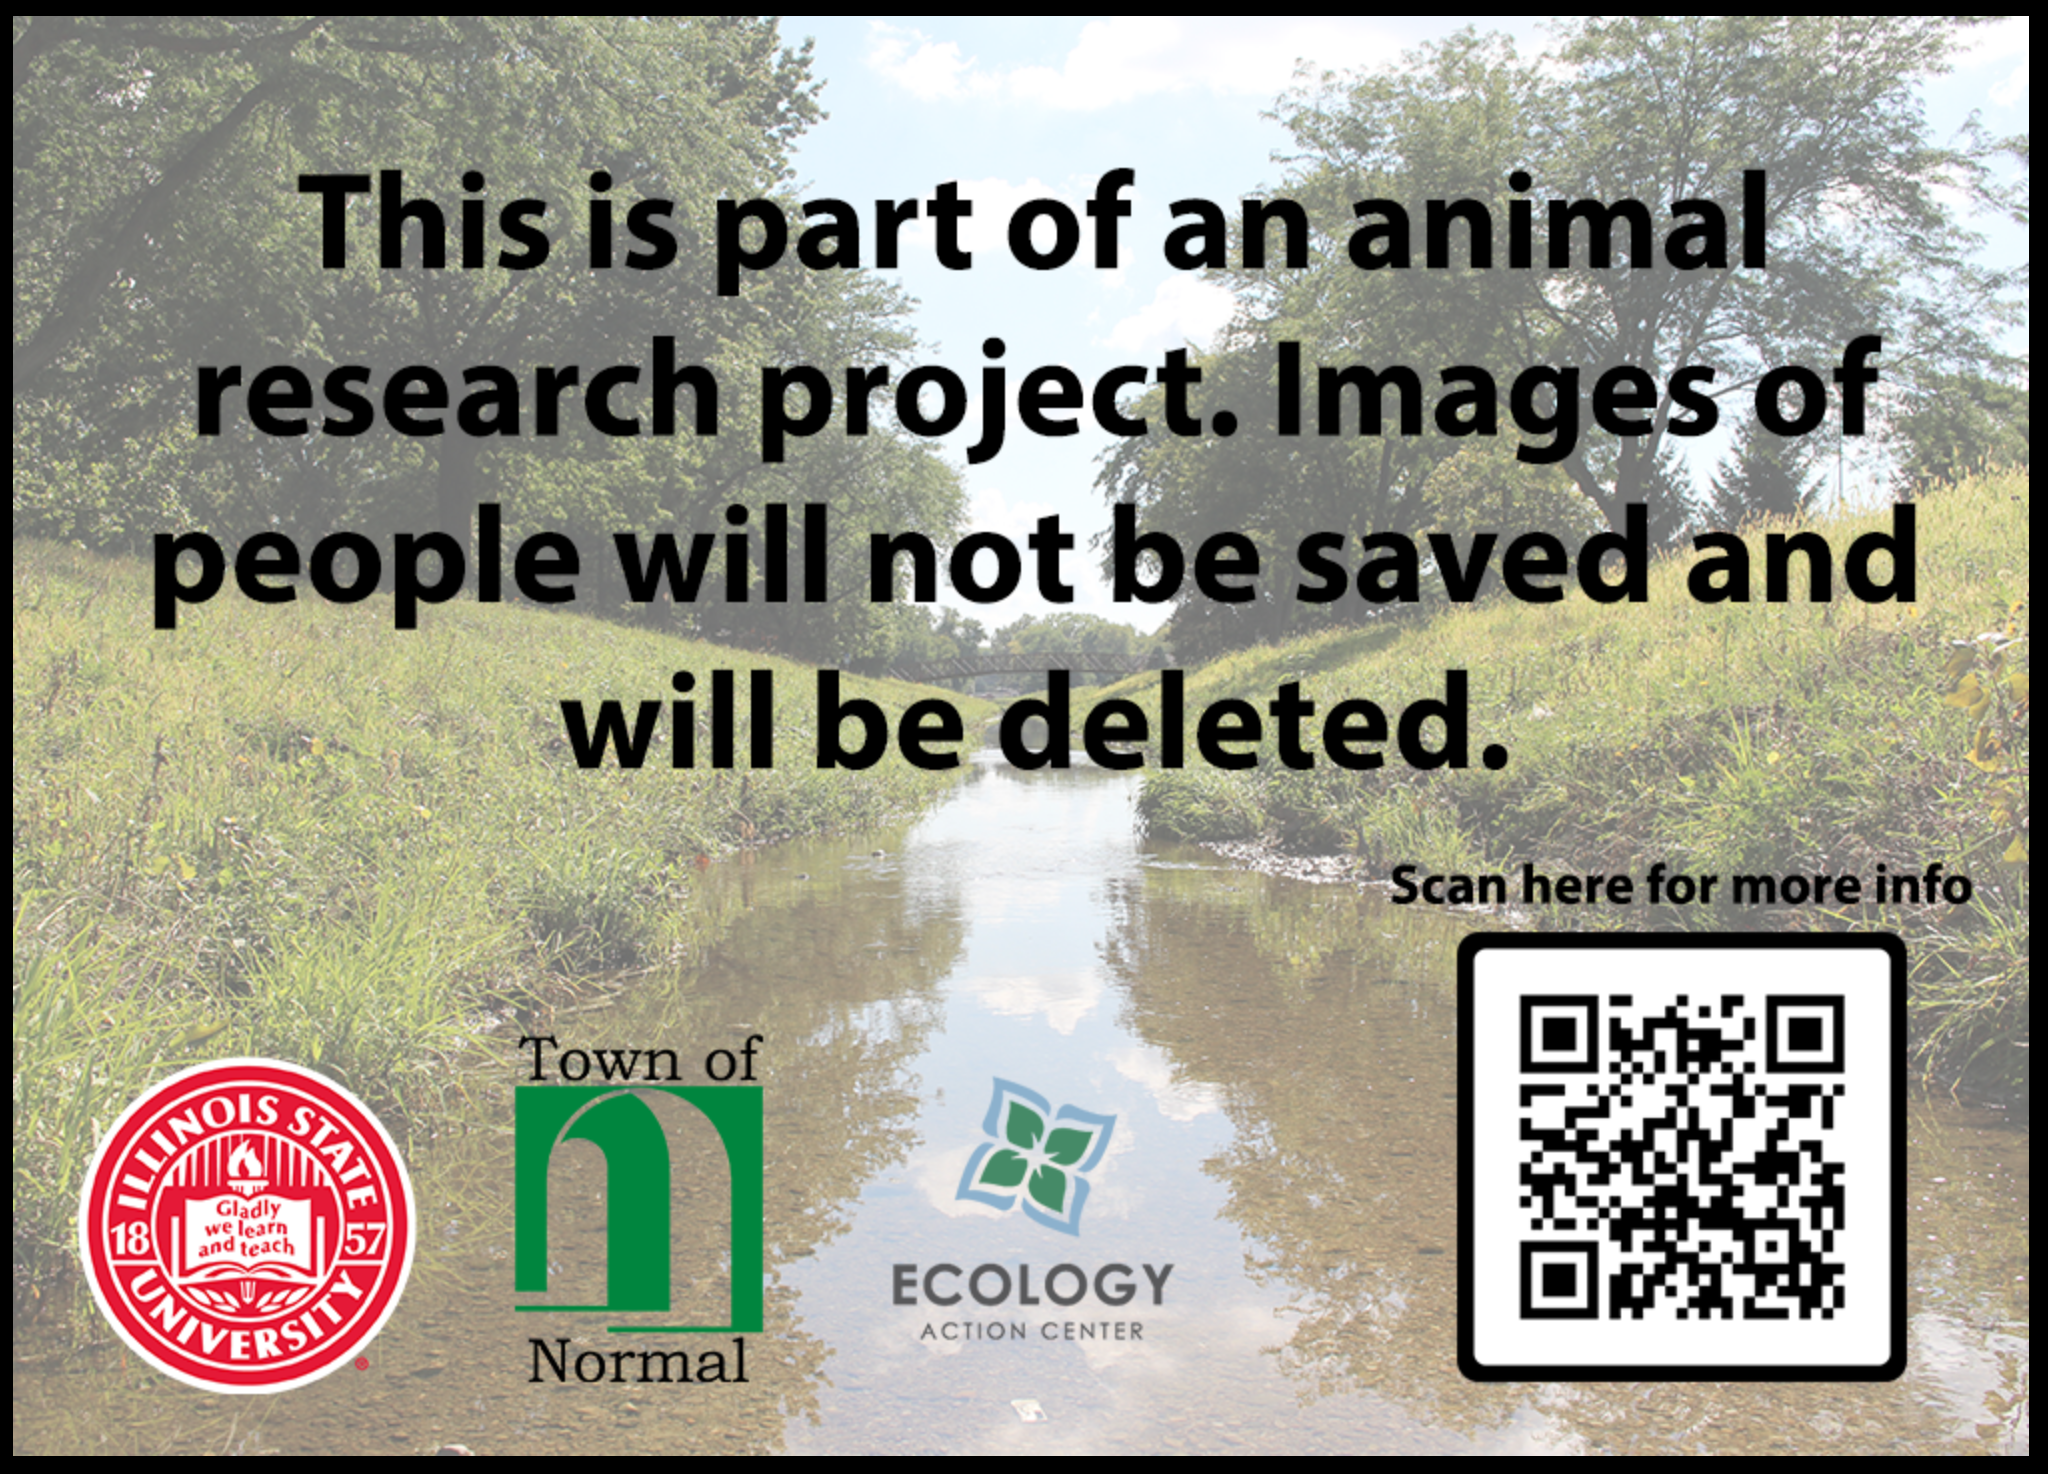 "This is part of an animal research project. Images of people will not be saved and will be deleted" reads words over image of creek.